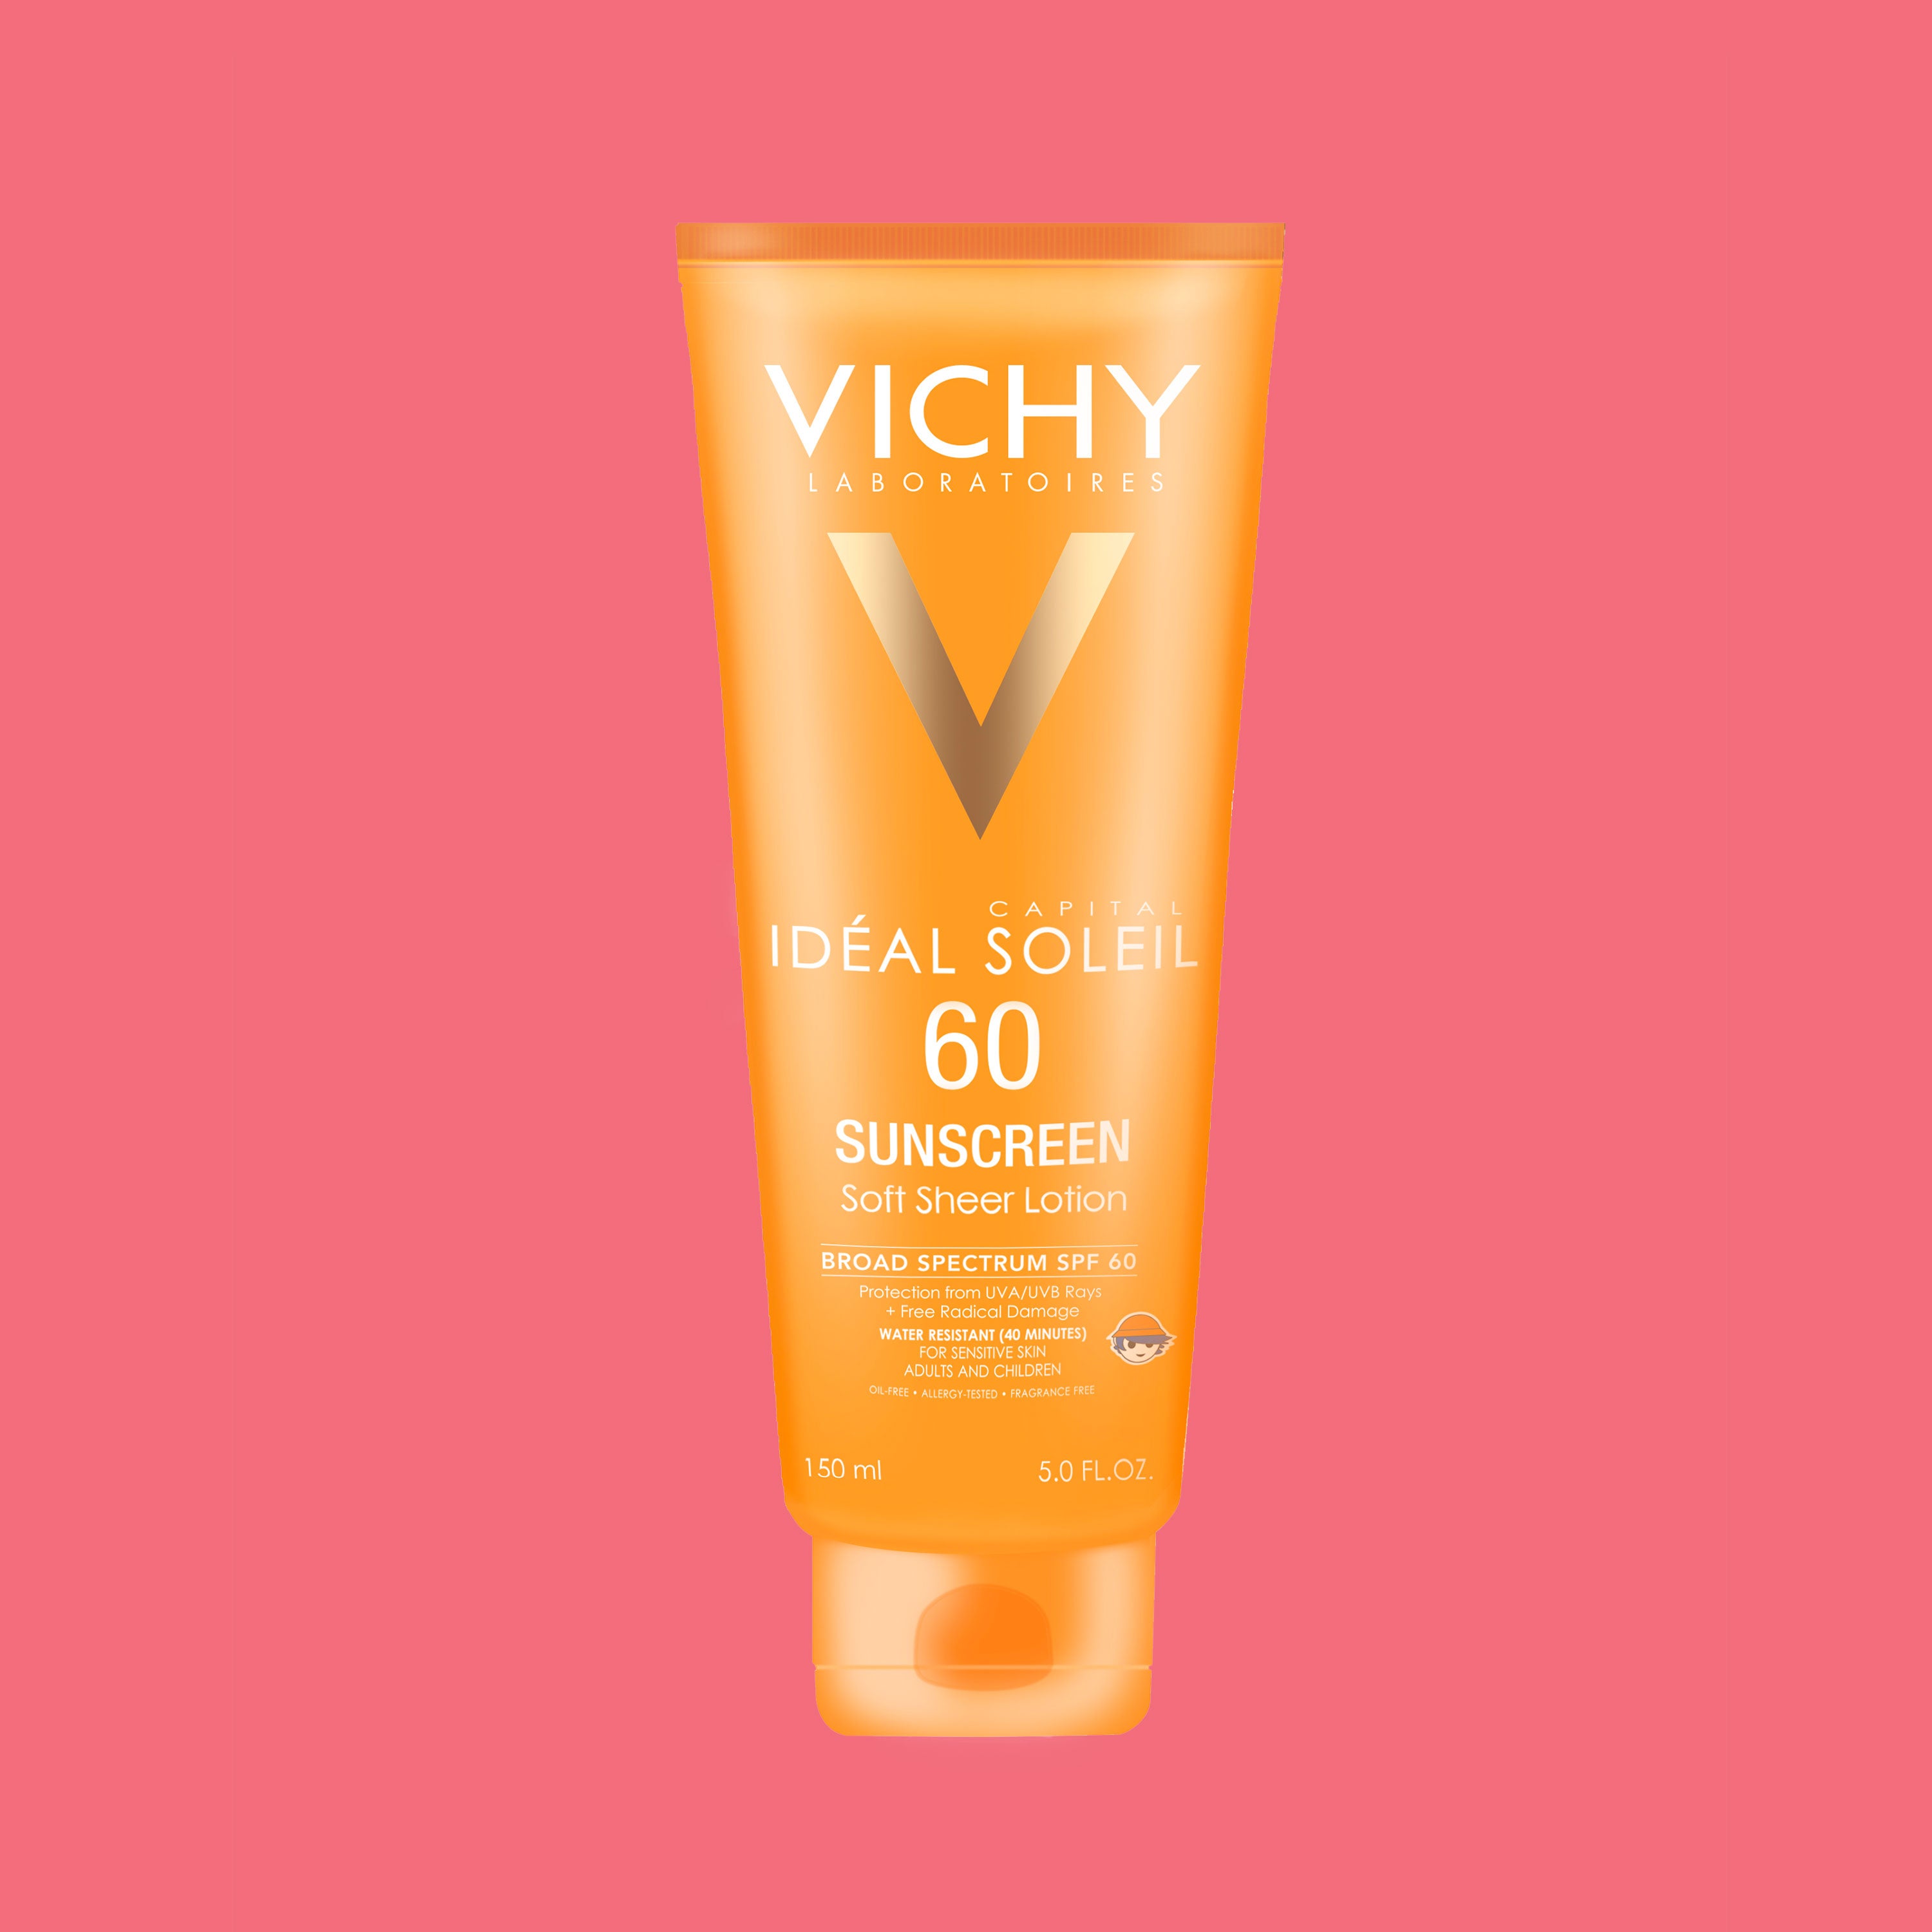 These Oil Free Sunscreens Won't Leave You With Greasy Skin
